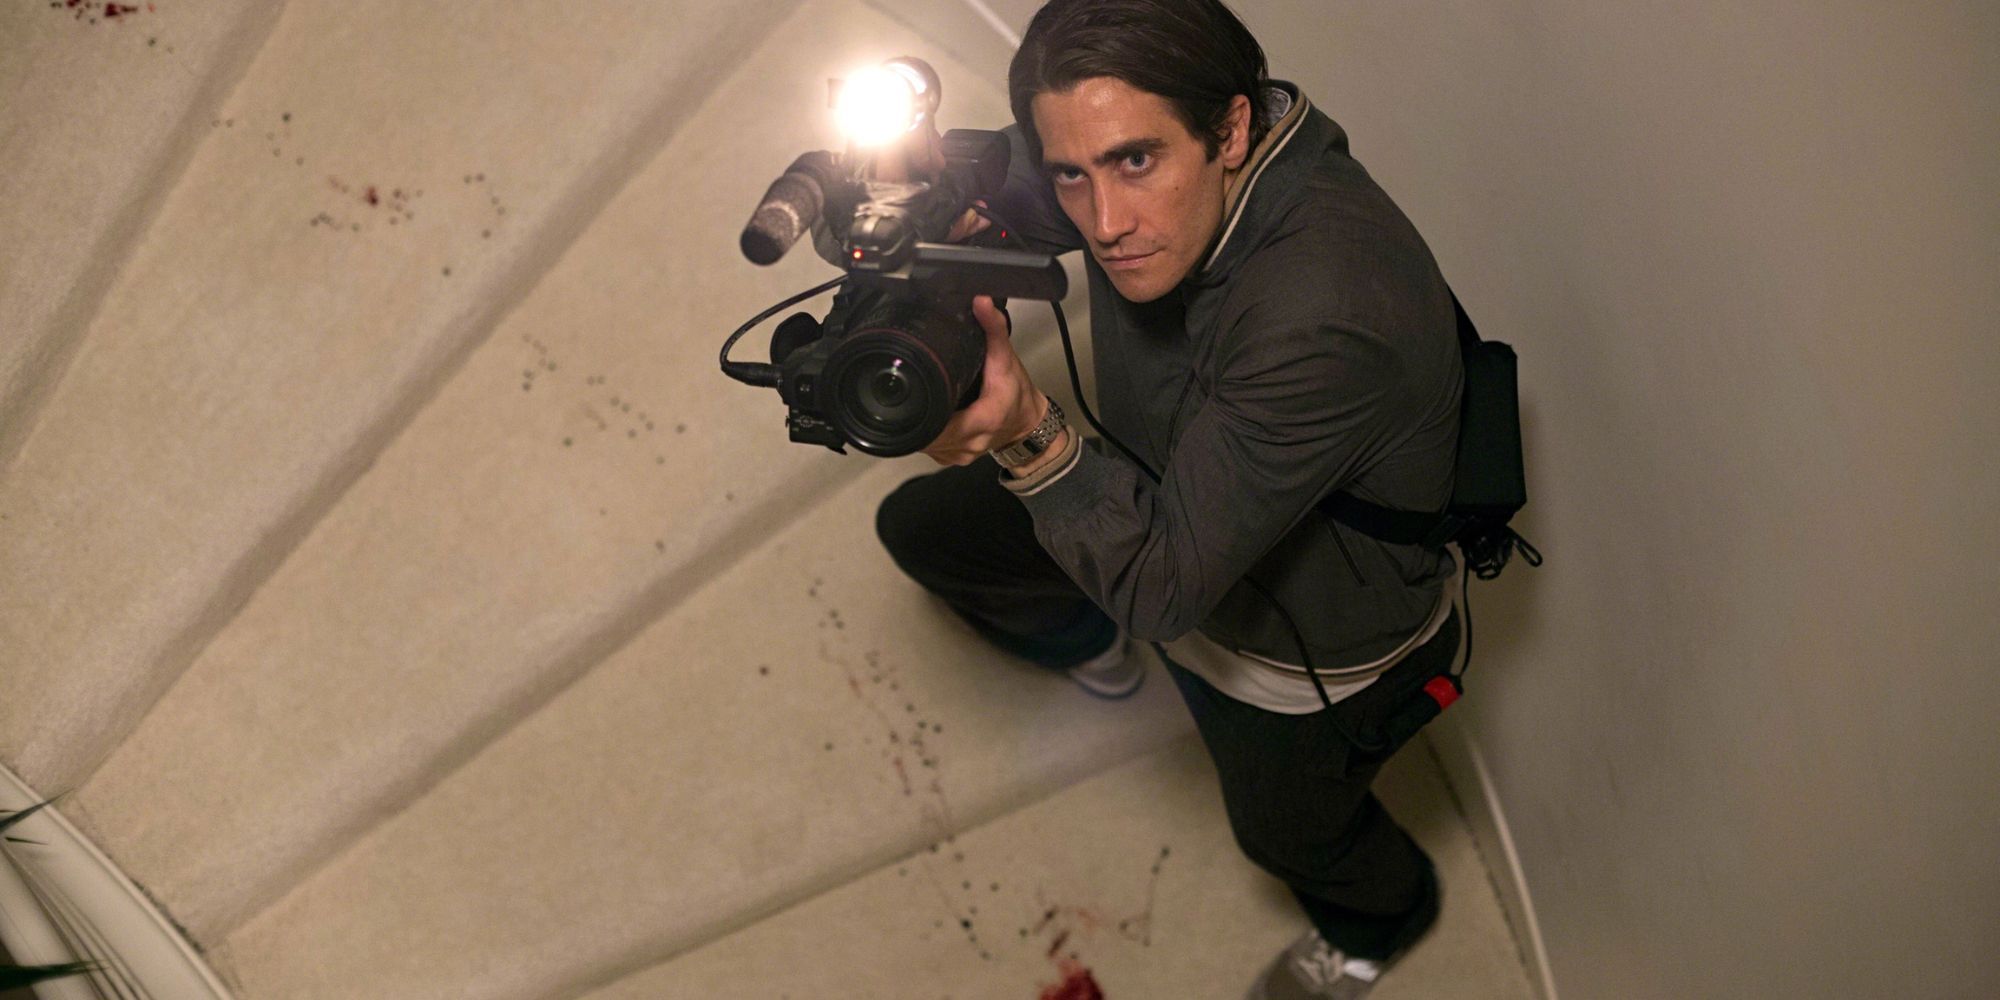 Lou aims his camera up while climing a set of stairs in the film Nightcrawler.